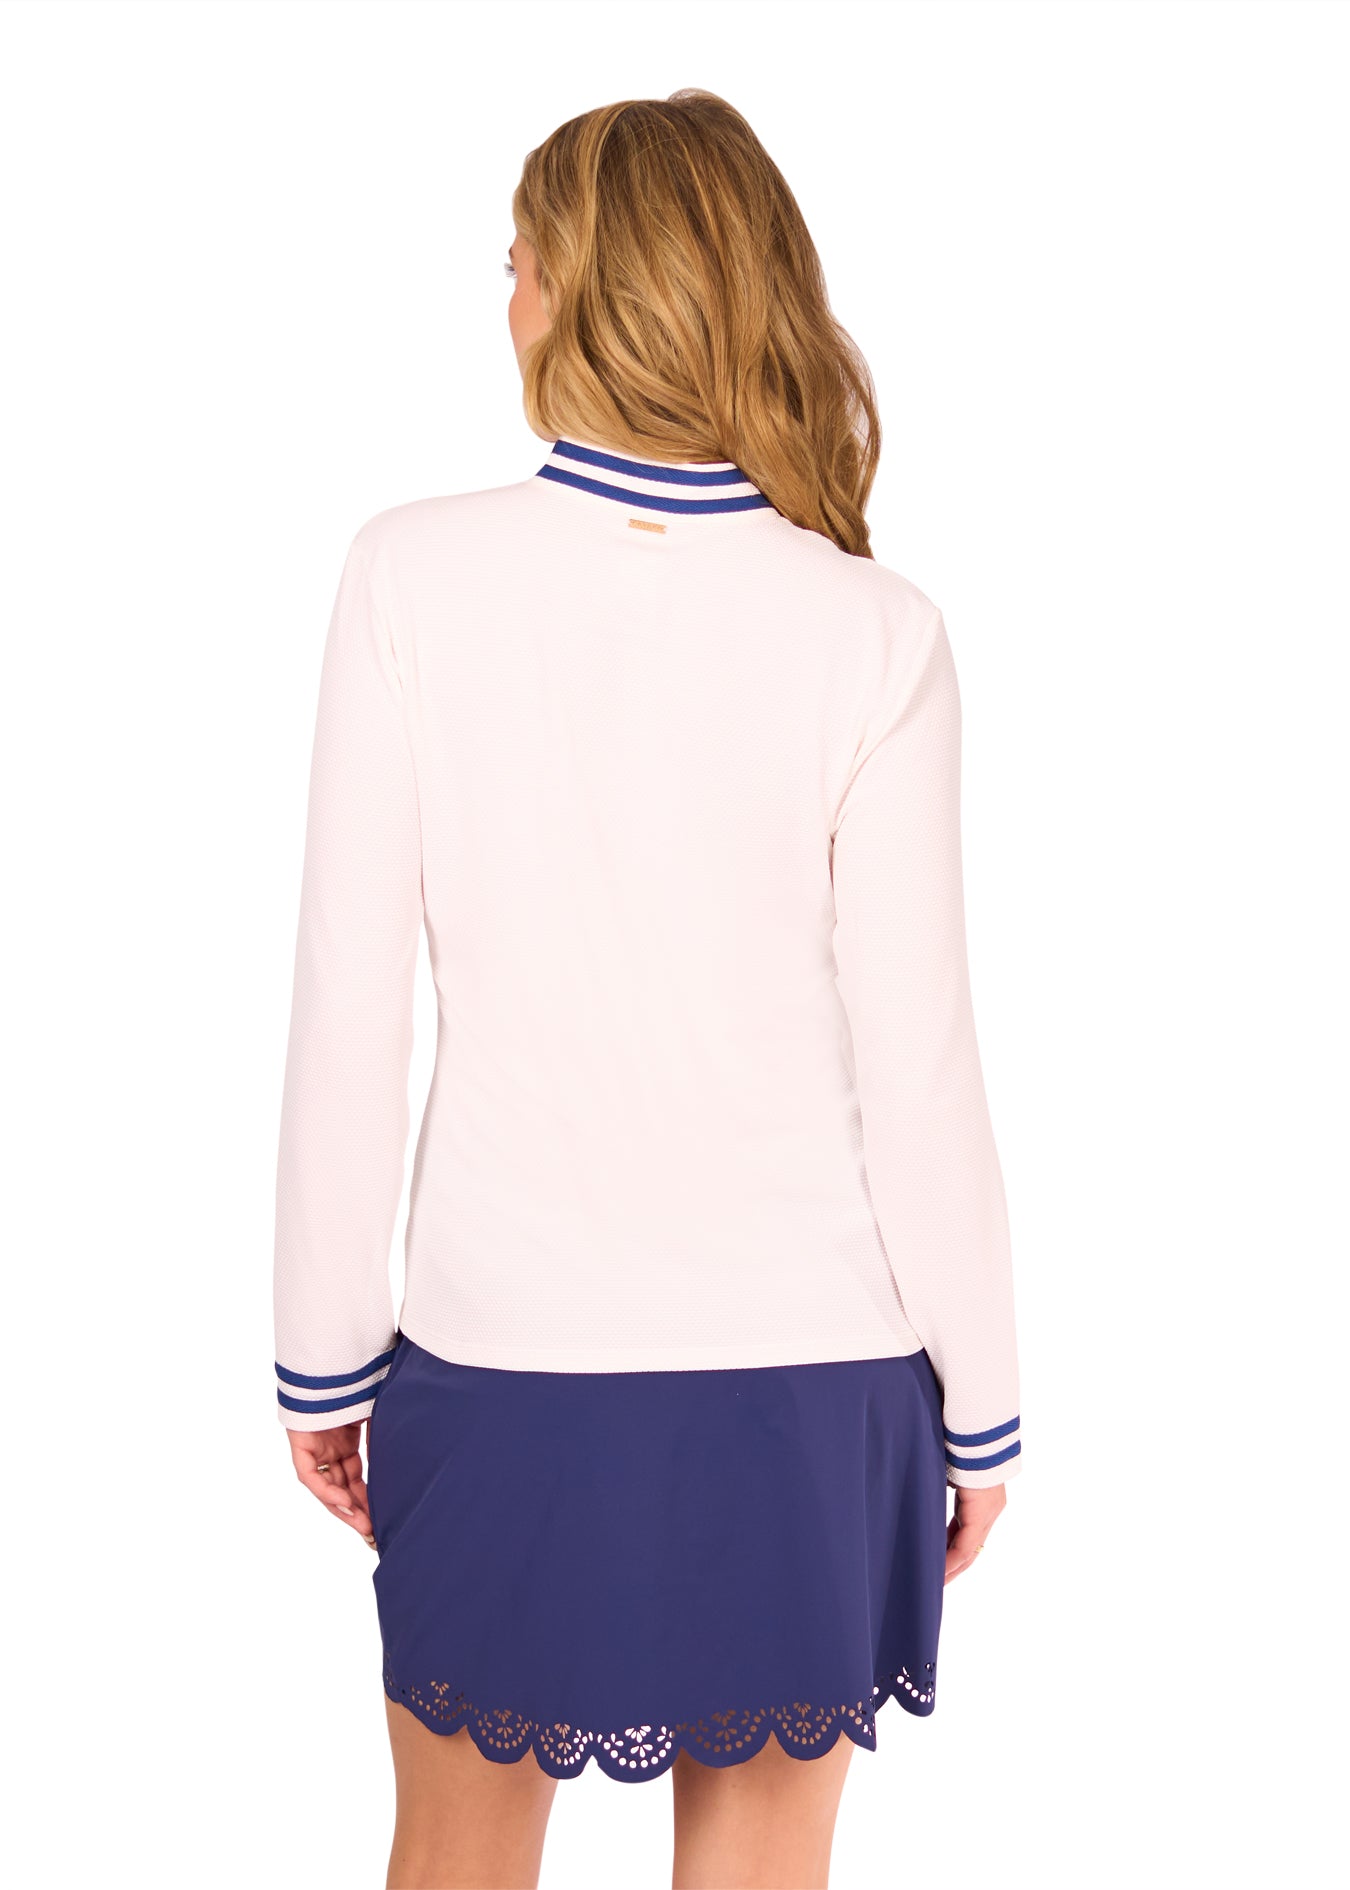 Back of Woman in White Collared 1/4 Zip and Navy Scallop Skort